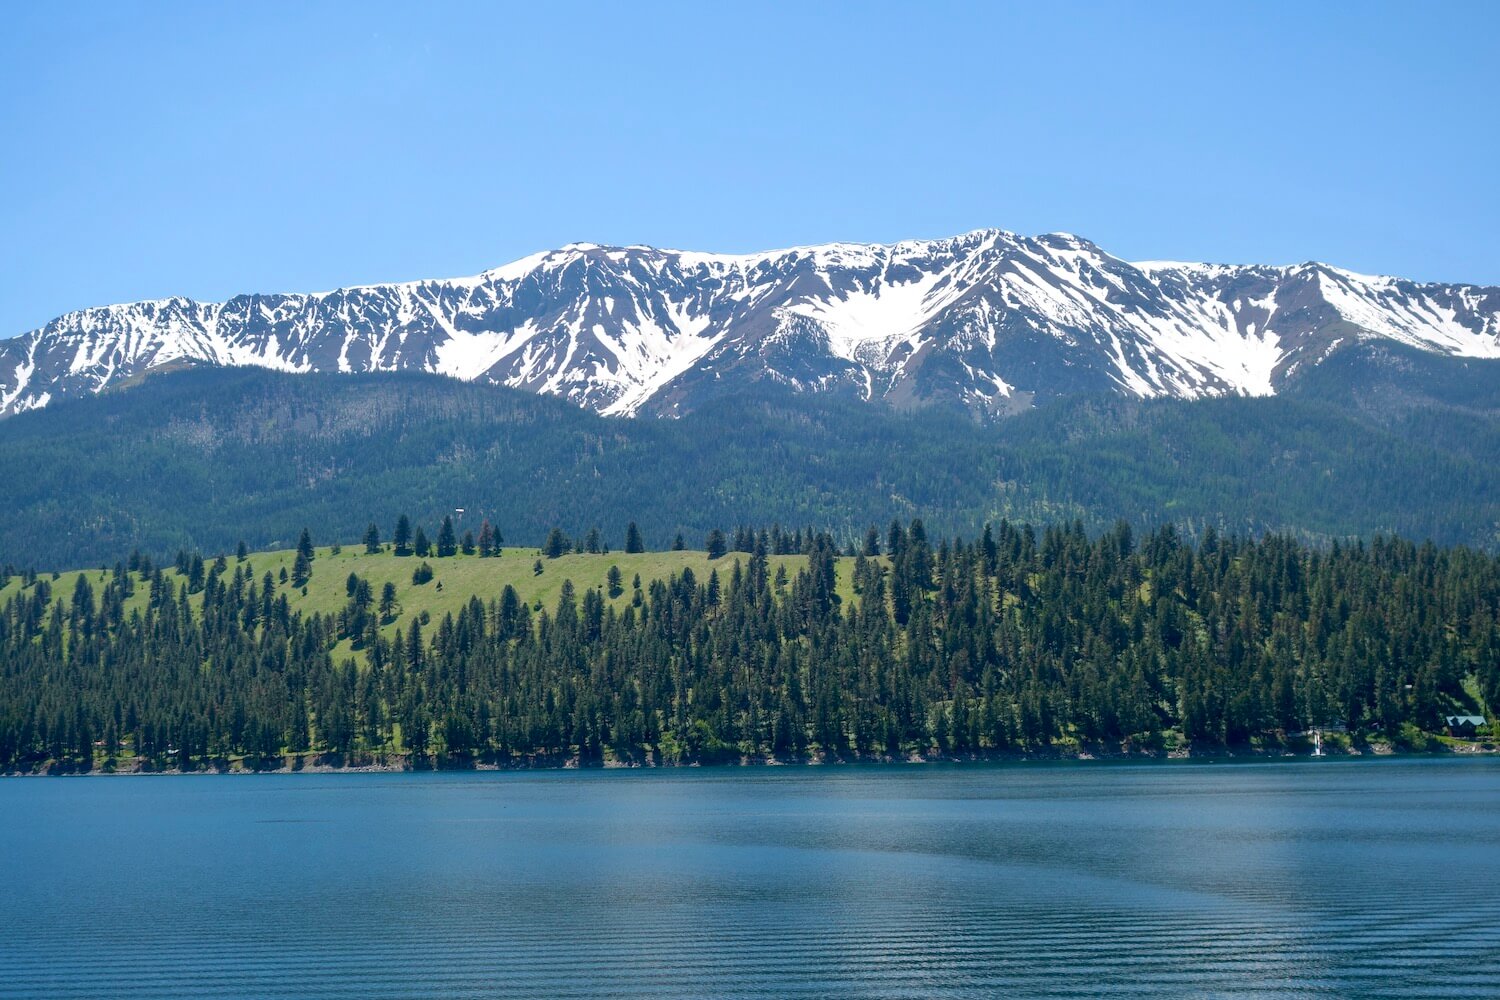 Wallowa Lake is peaceful as a band of forest and meadow show off various textures of green while the snow covered mountains rise toward the blue sky. 